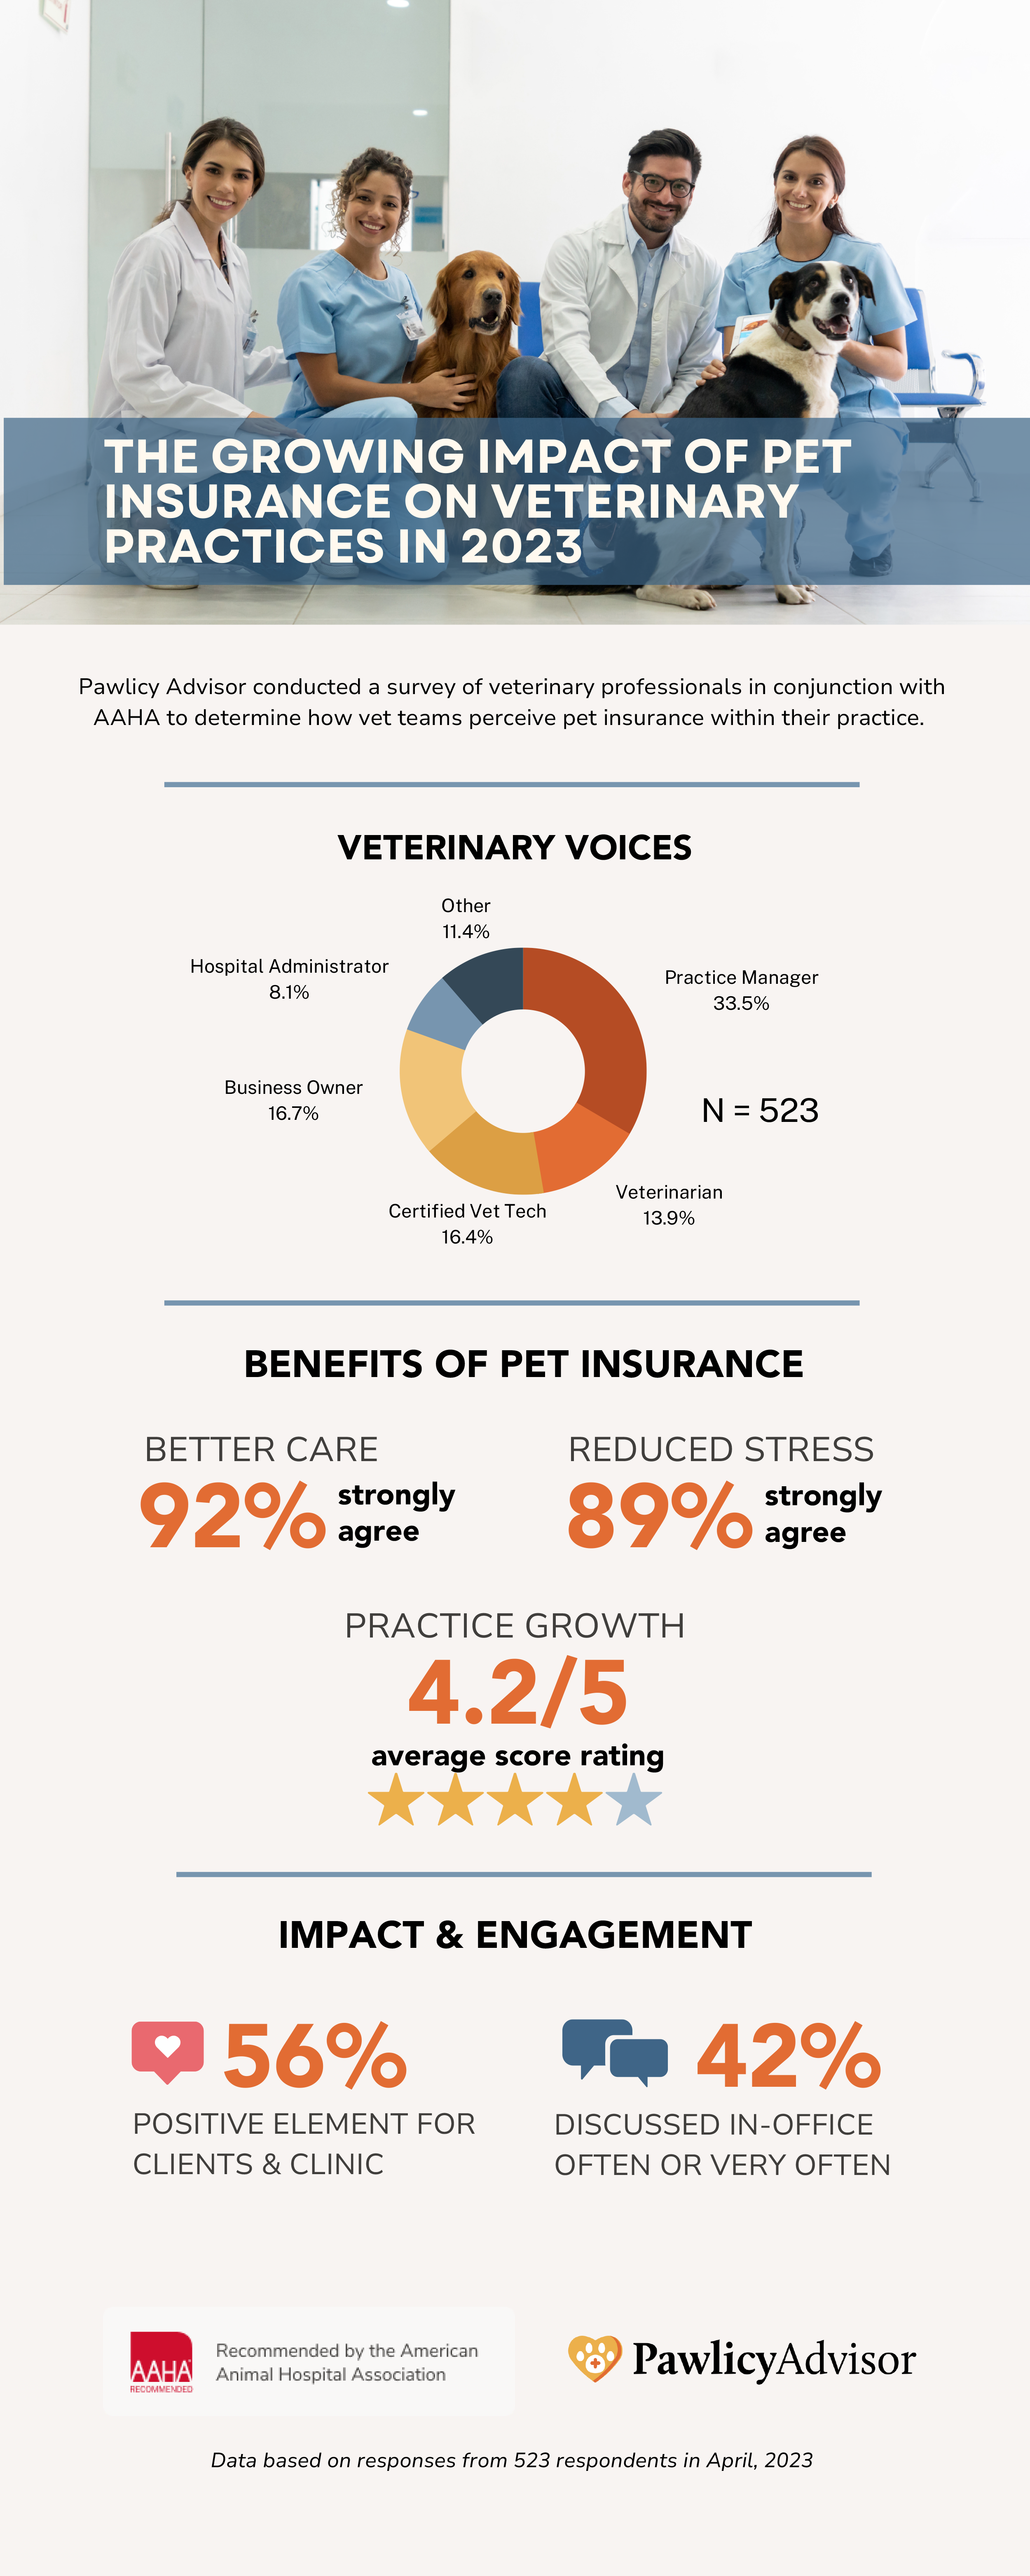 Sept23-Pawlicy Advisor-AAHA infographic-Epi.png